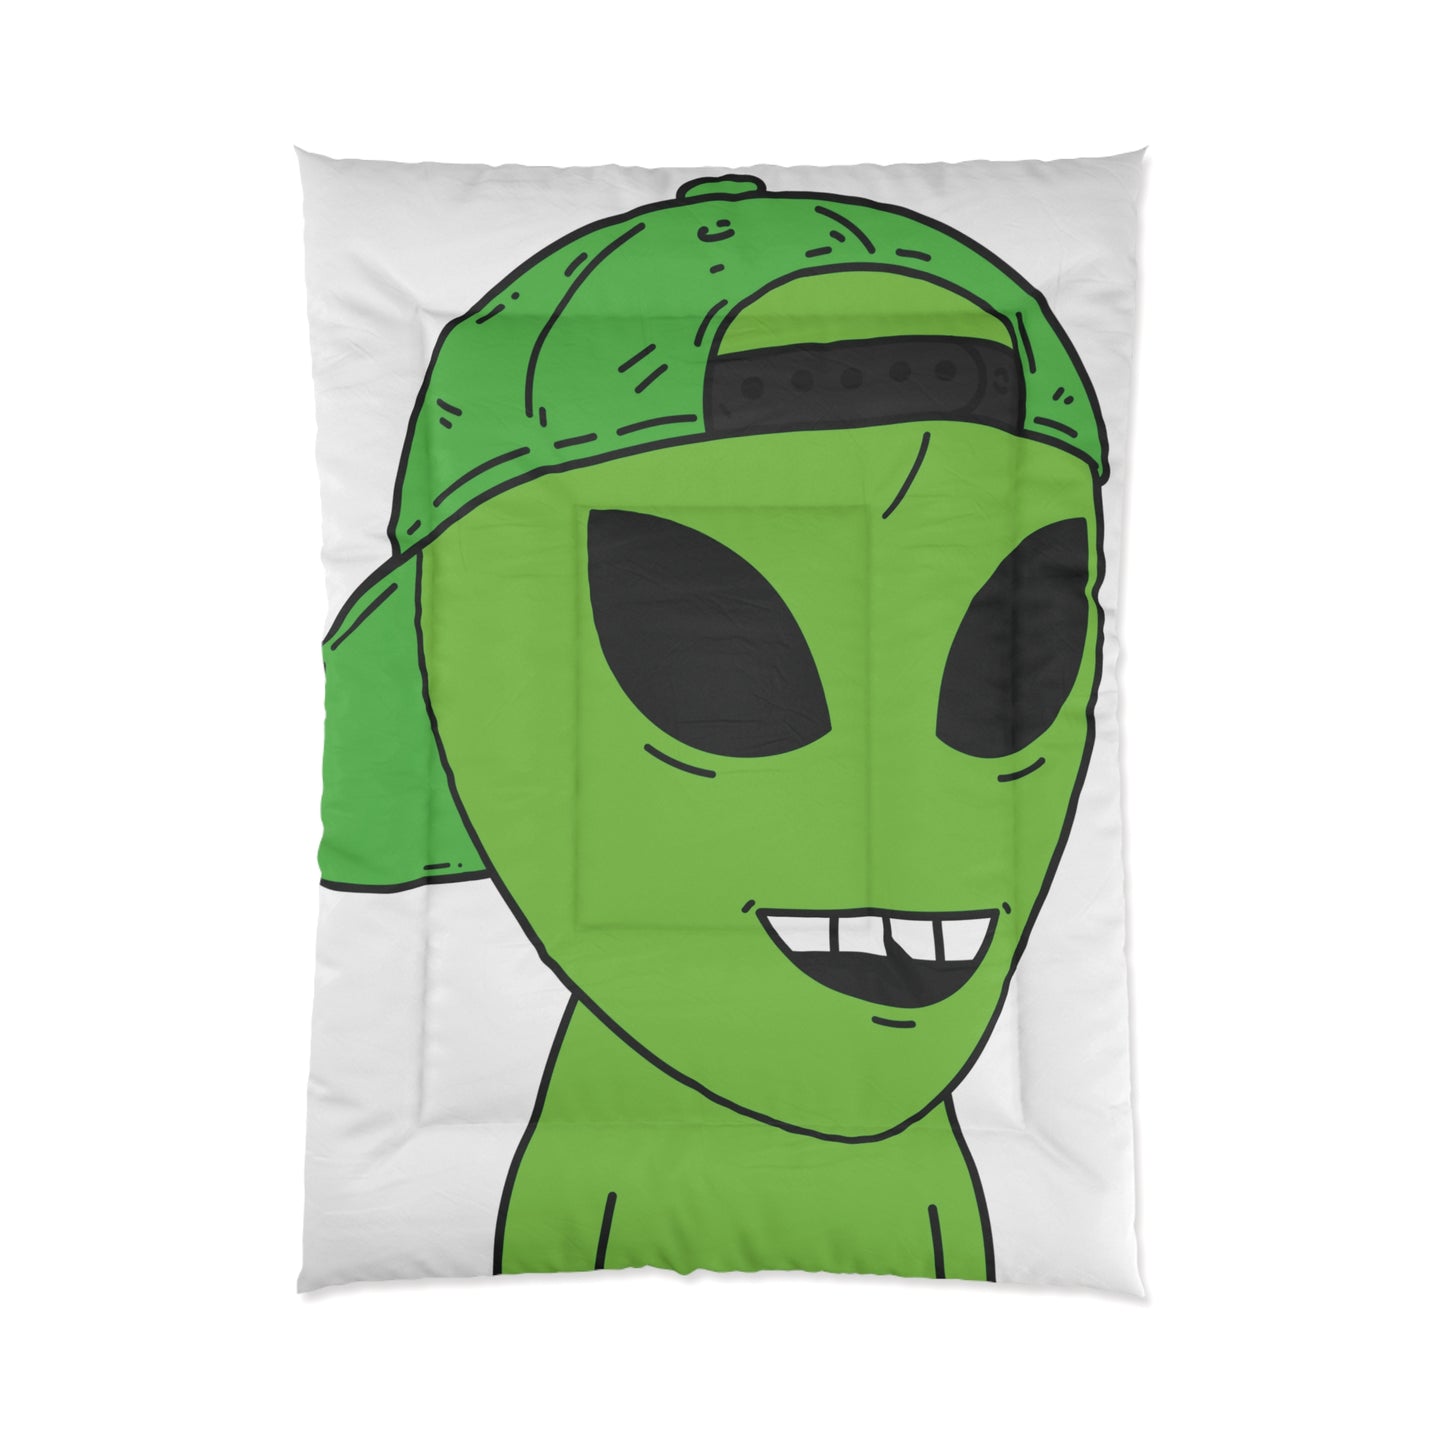 The Green Alien Visitor with Hat Bed Comforter